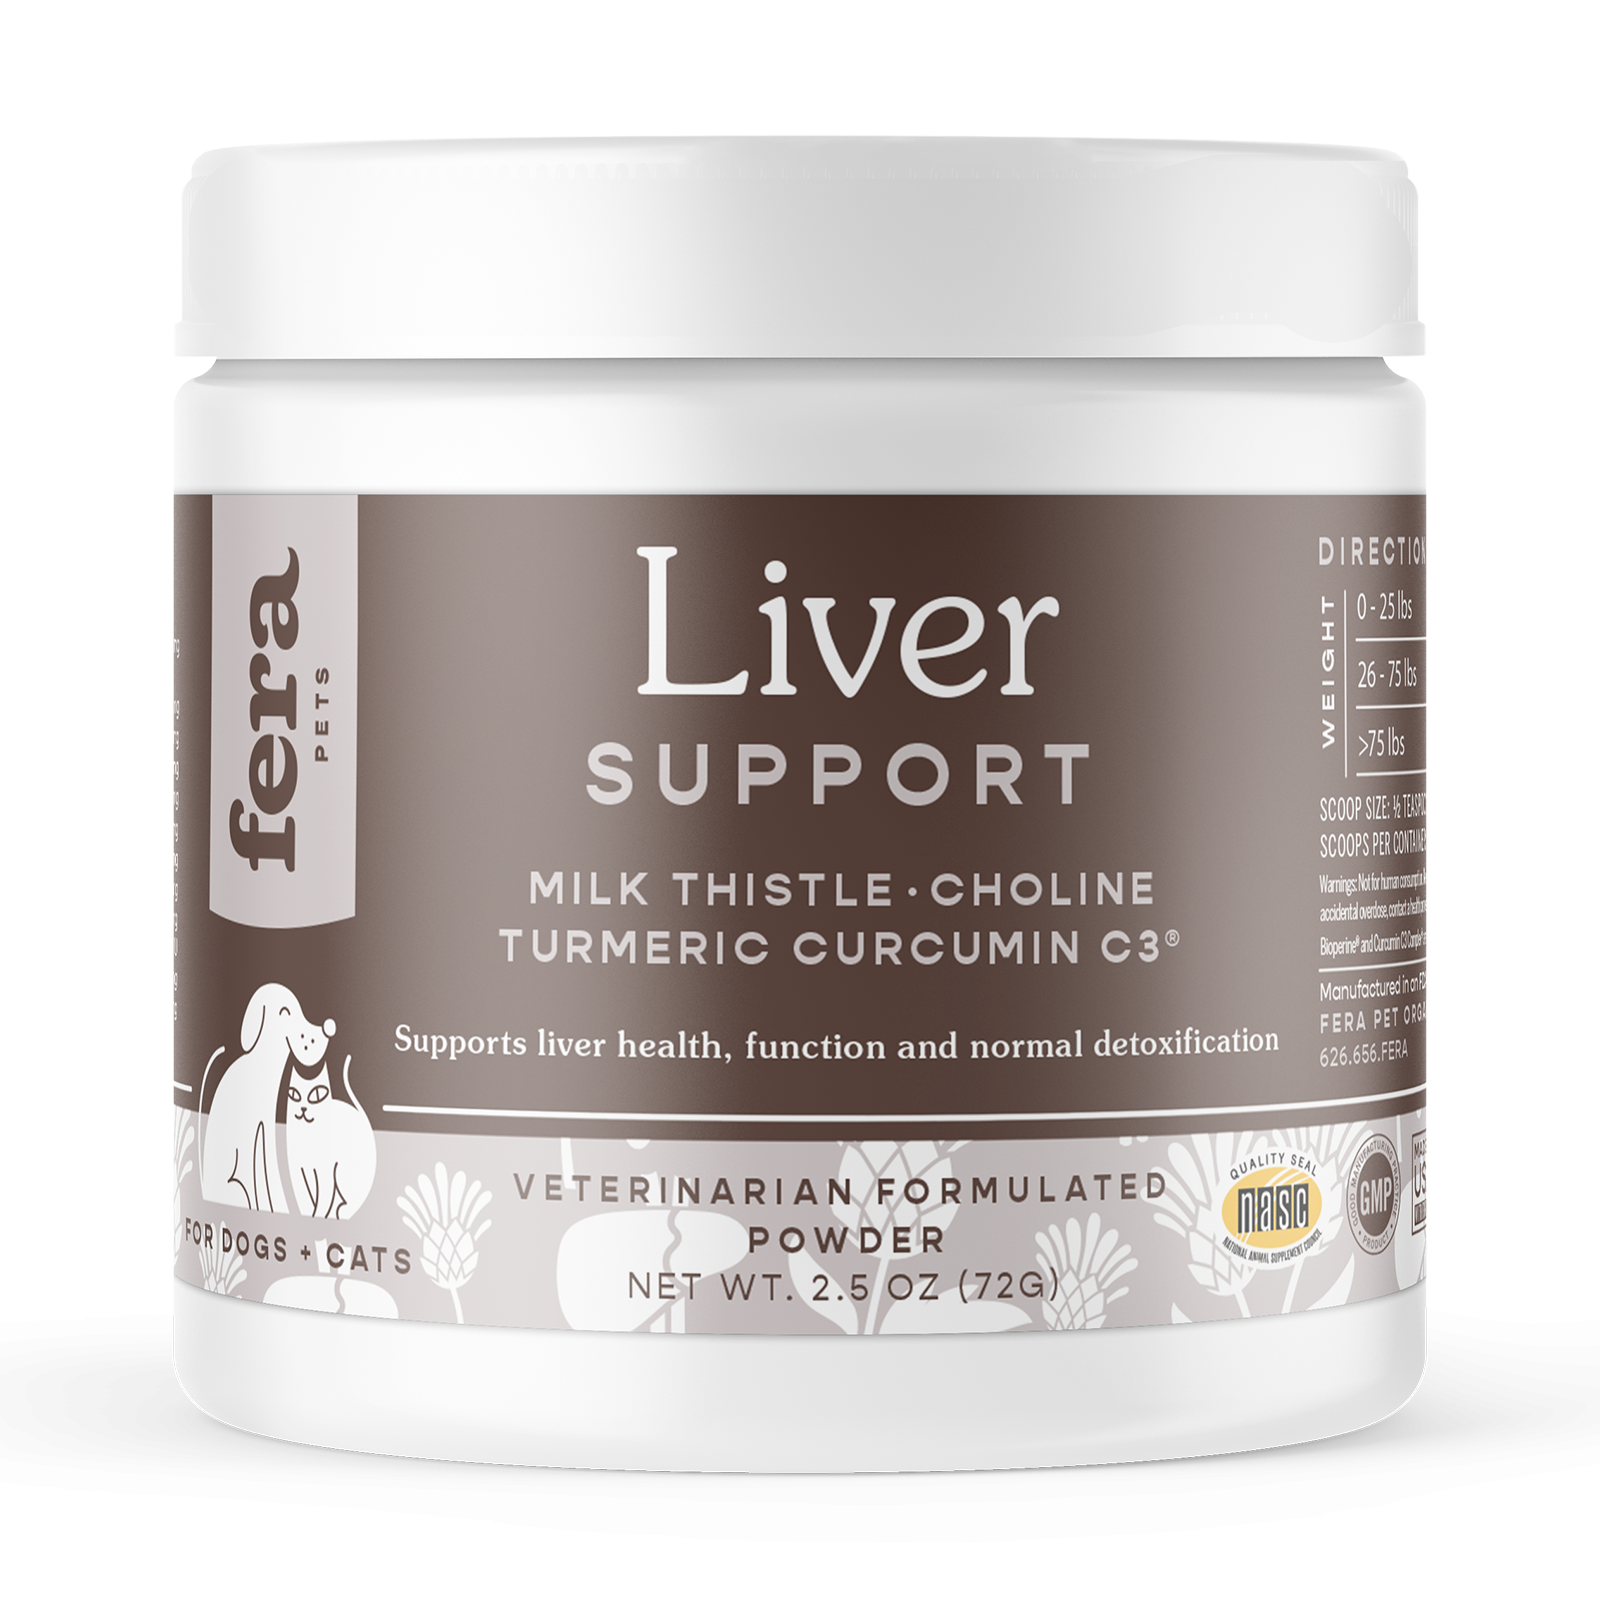 Fera Pet Organics Liver Support Supplement for Dogs and Cats